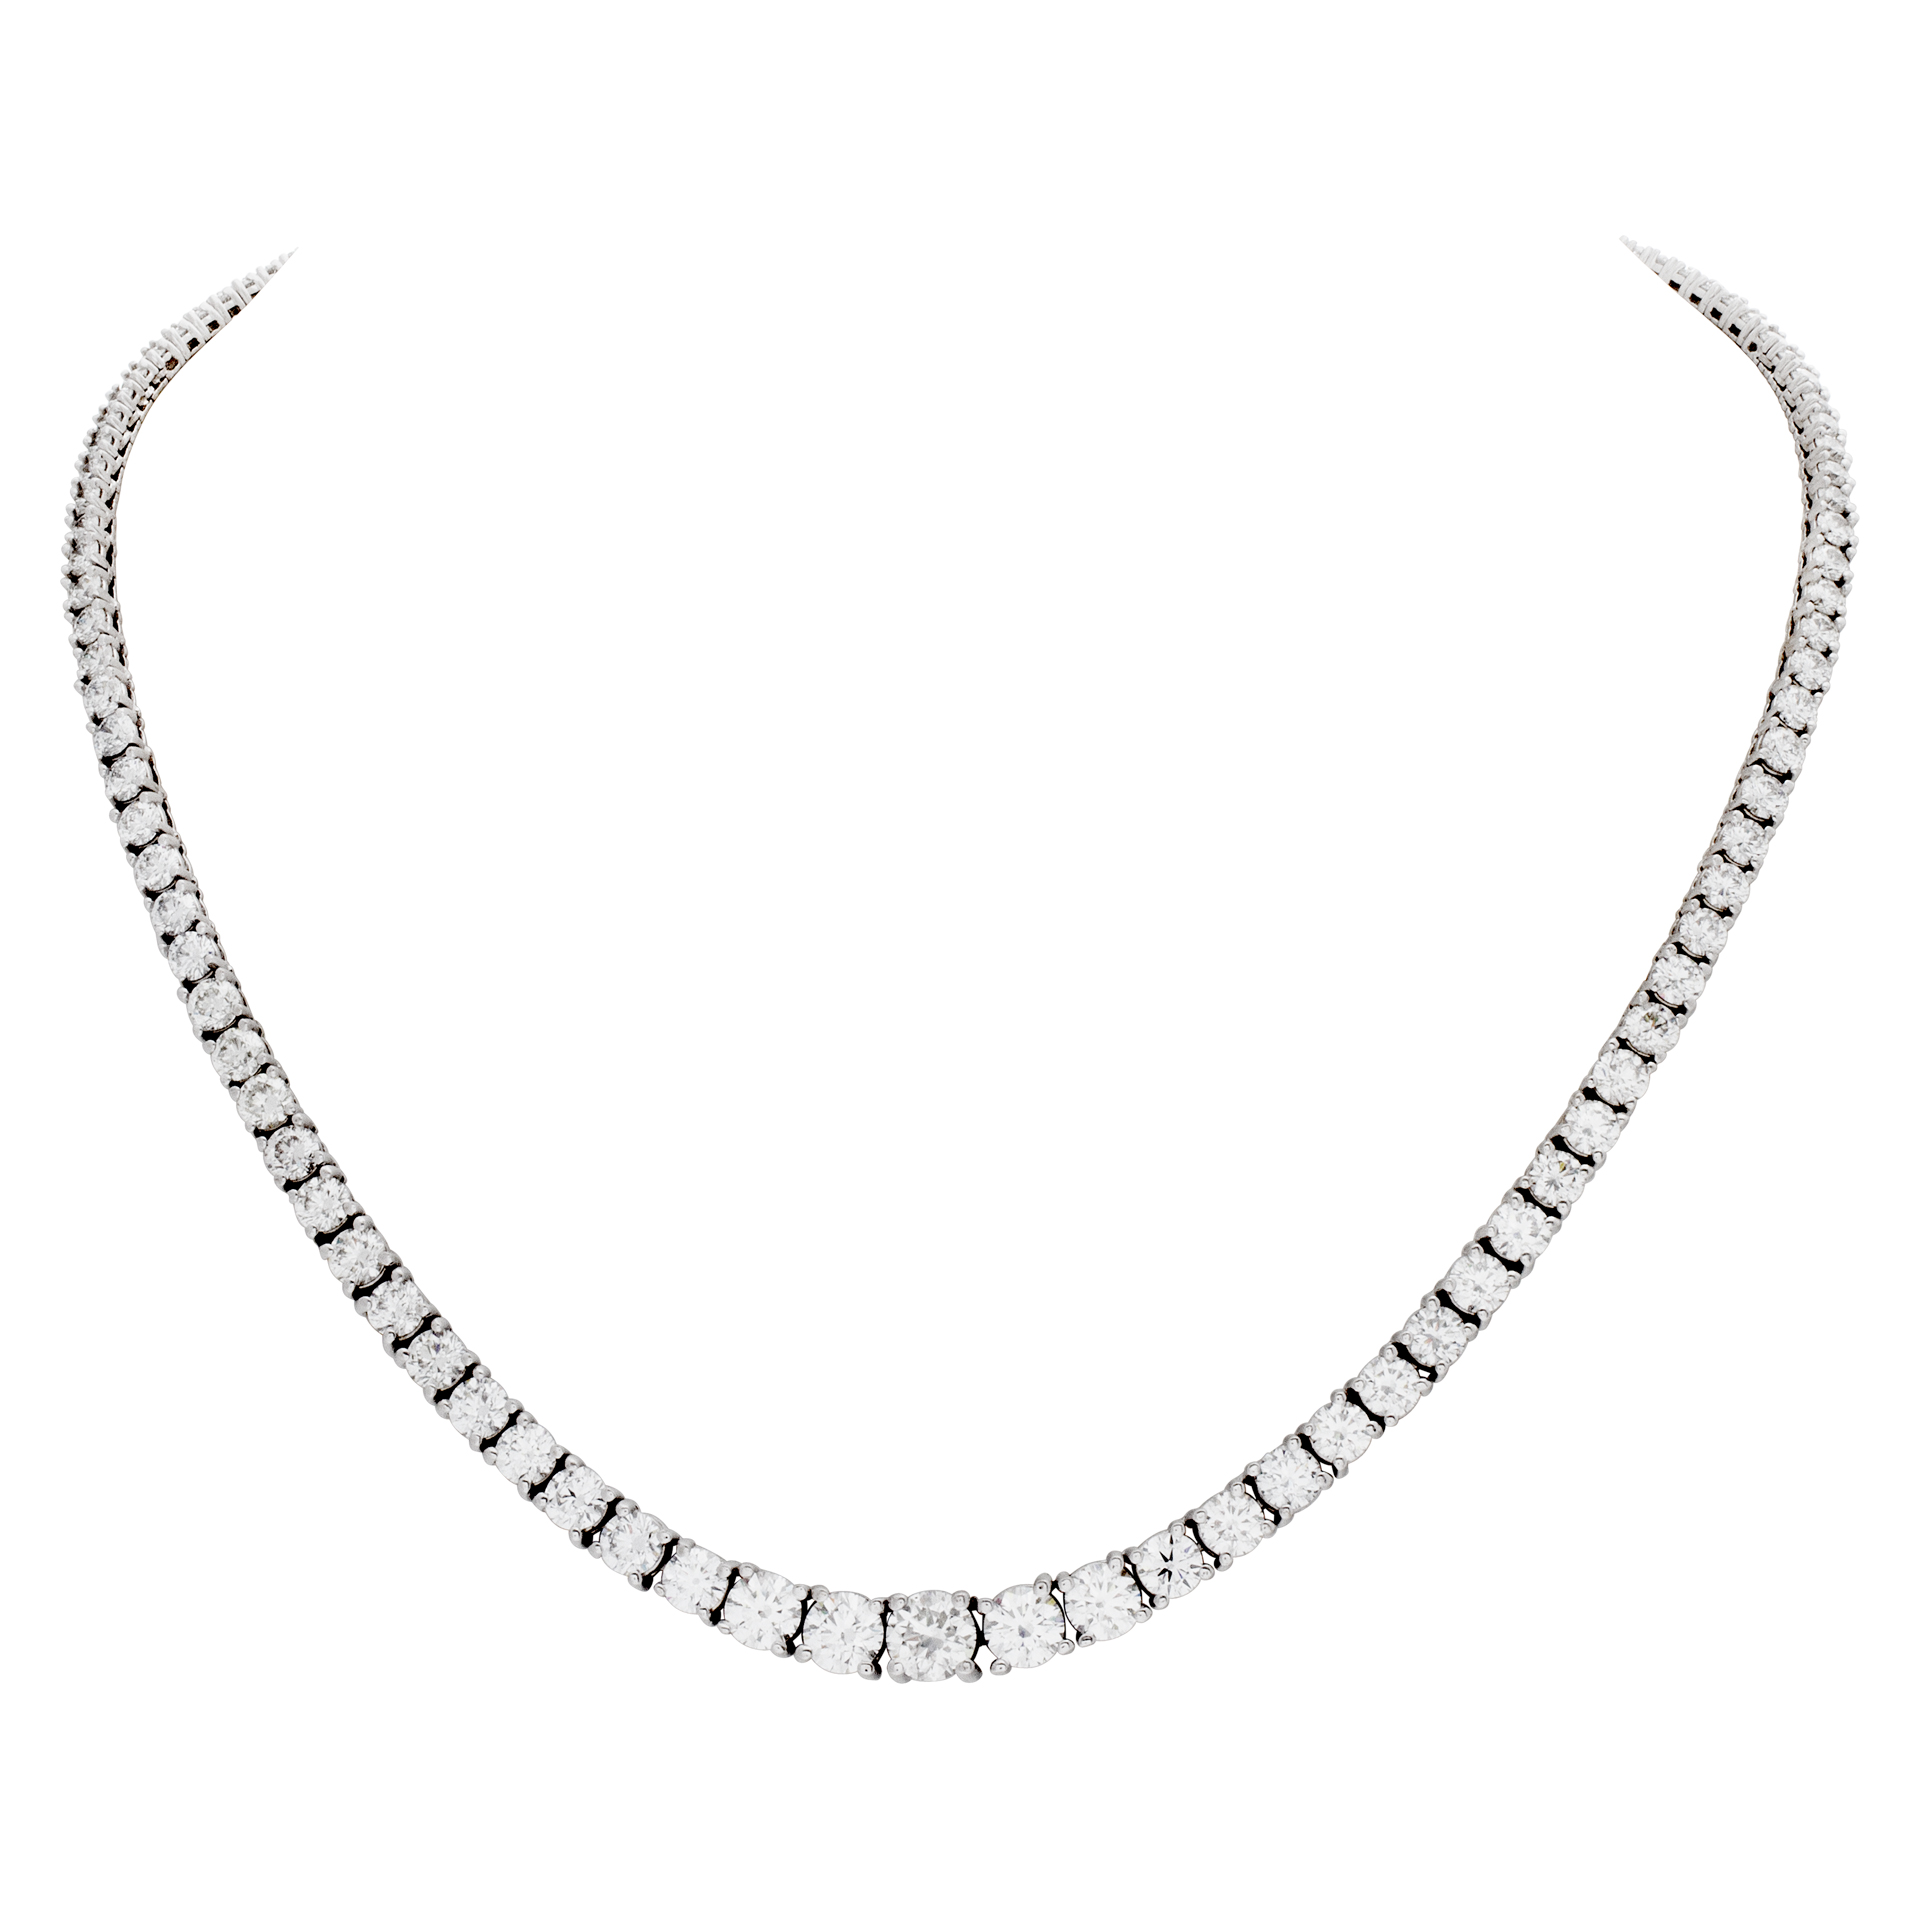 Diamond Riviera necklace with center GIA certified diamond (0.90 carat) and over 17.73 carats full cut round brilliant diamonds, in 18k White gold image 1